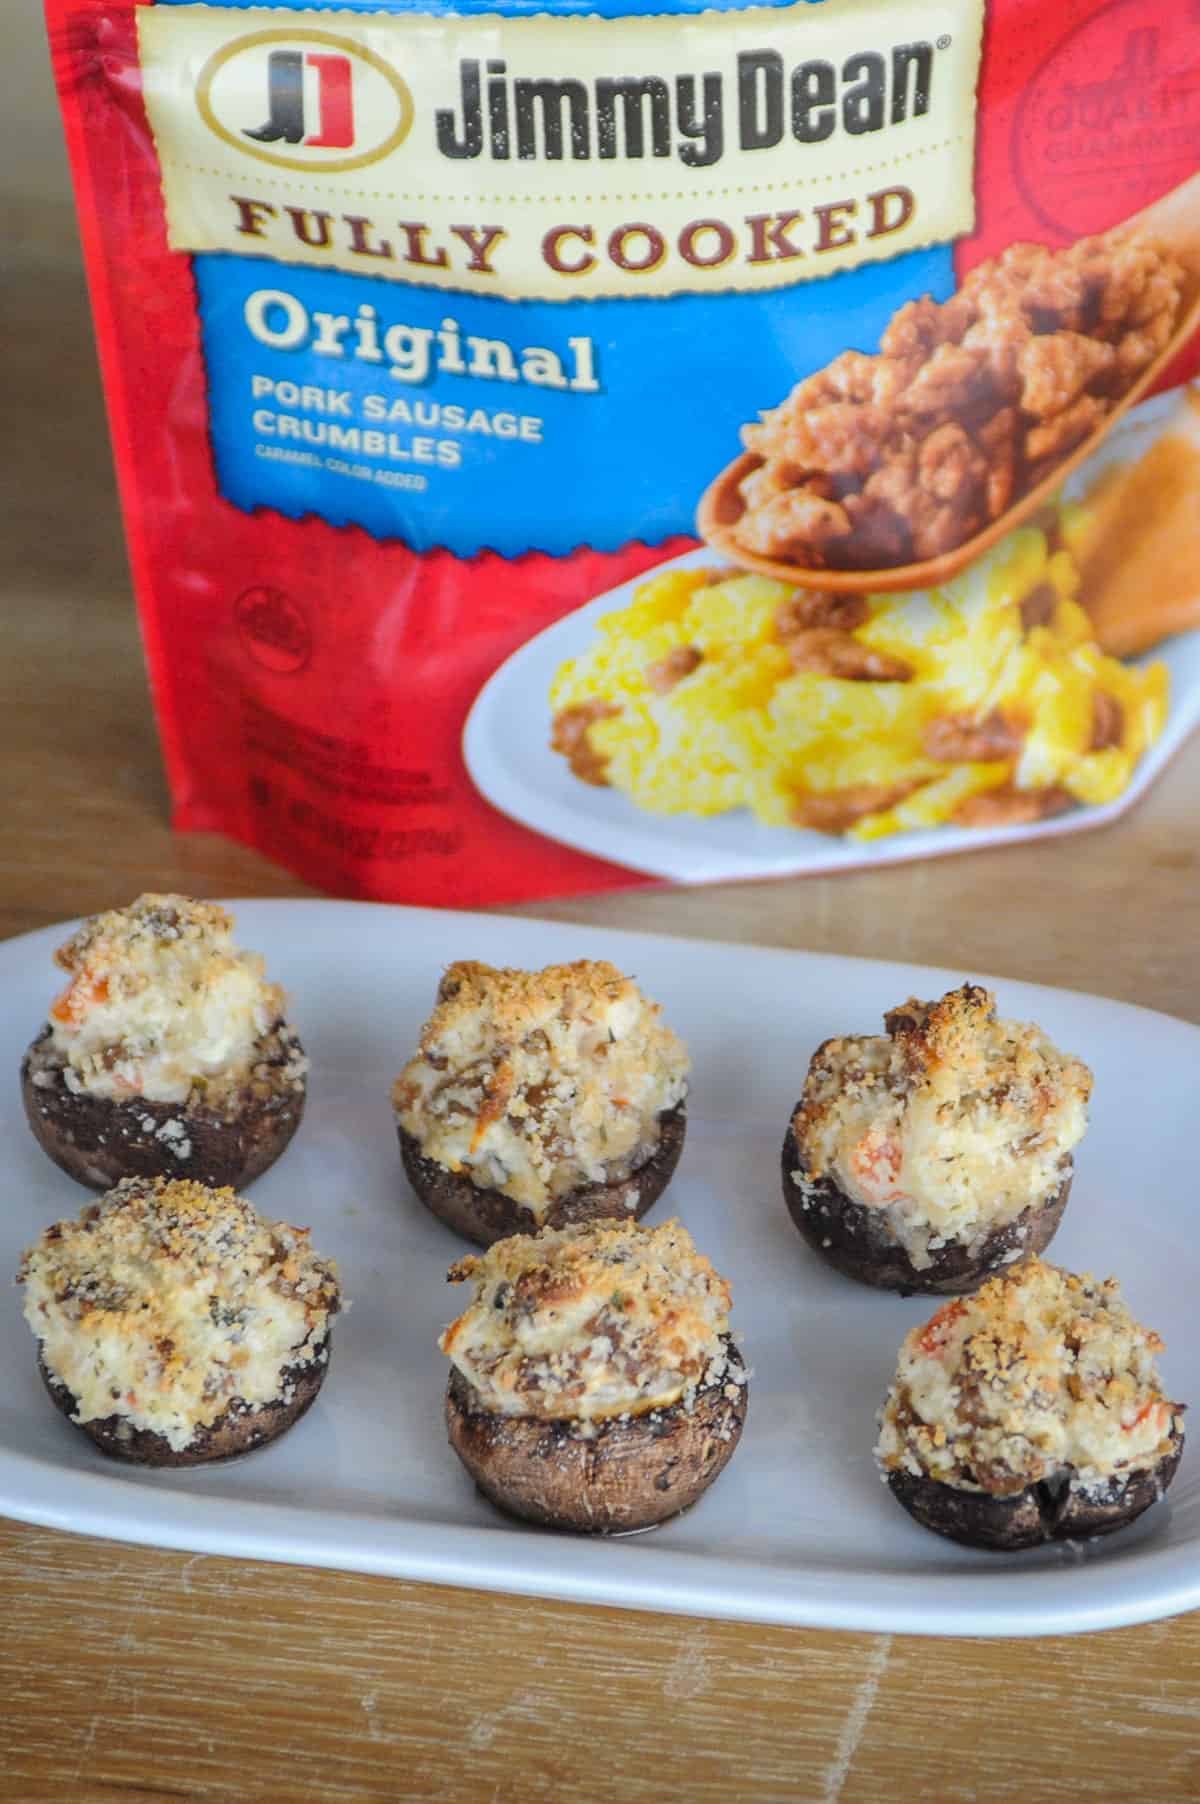 Stuffed mushrooms by bag of Jimmy Dean fully cooked sausage.